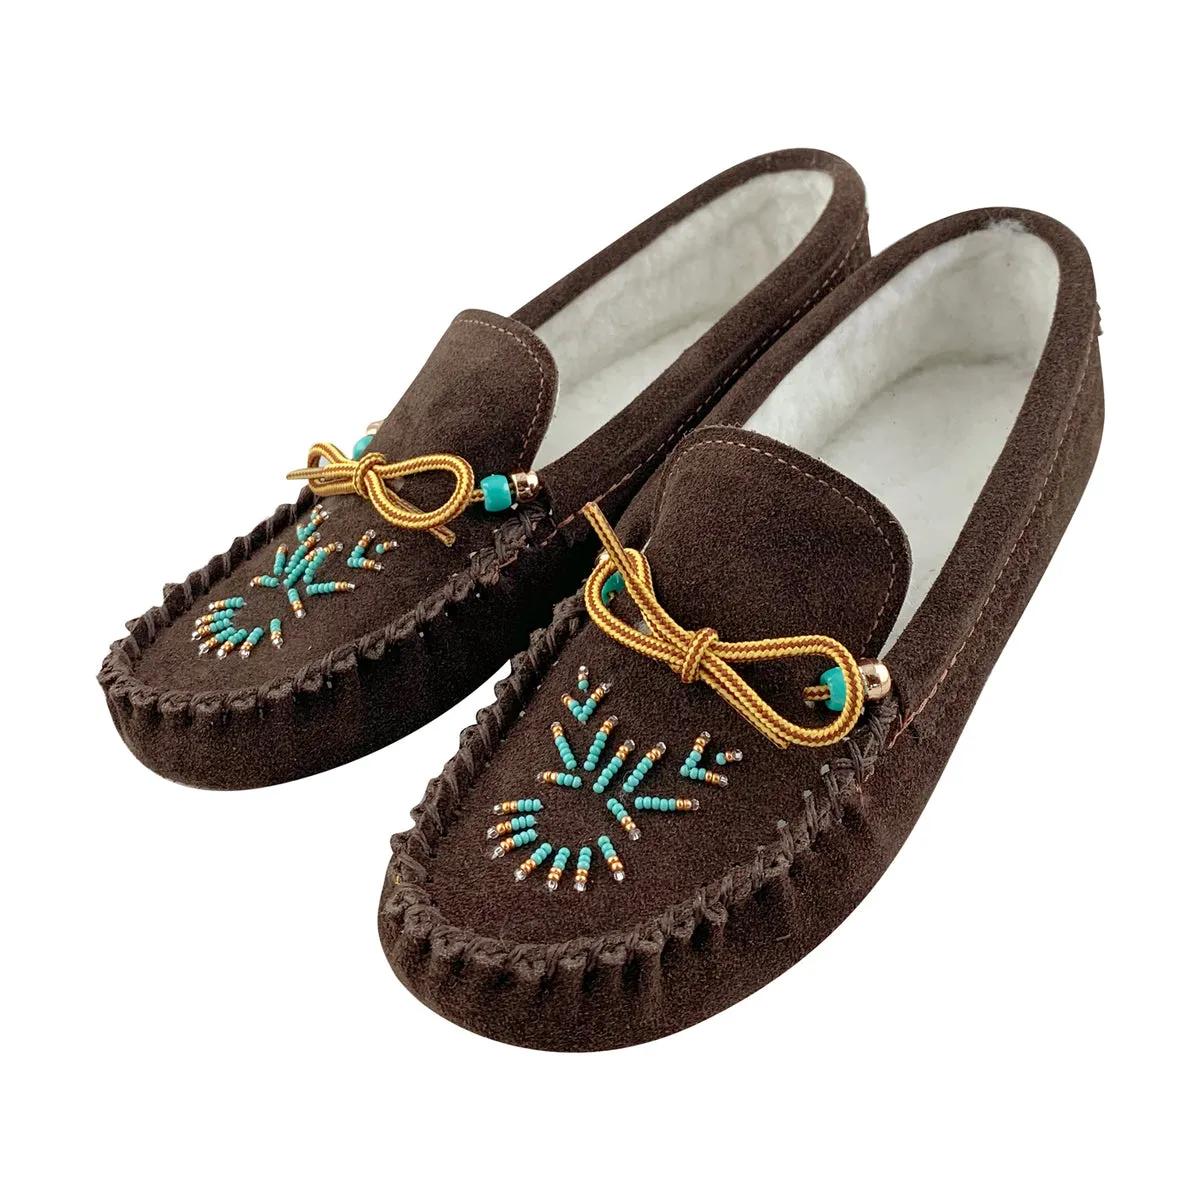 Pictures Of Moccasins Shoes : Men&amp;#39;s Moosehide Leather Moccasin Boots ...